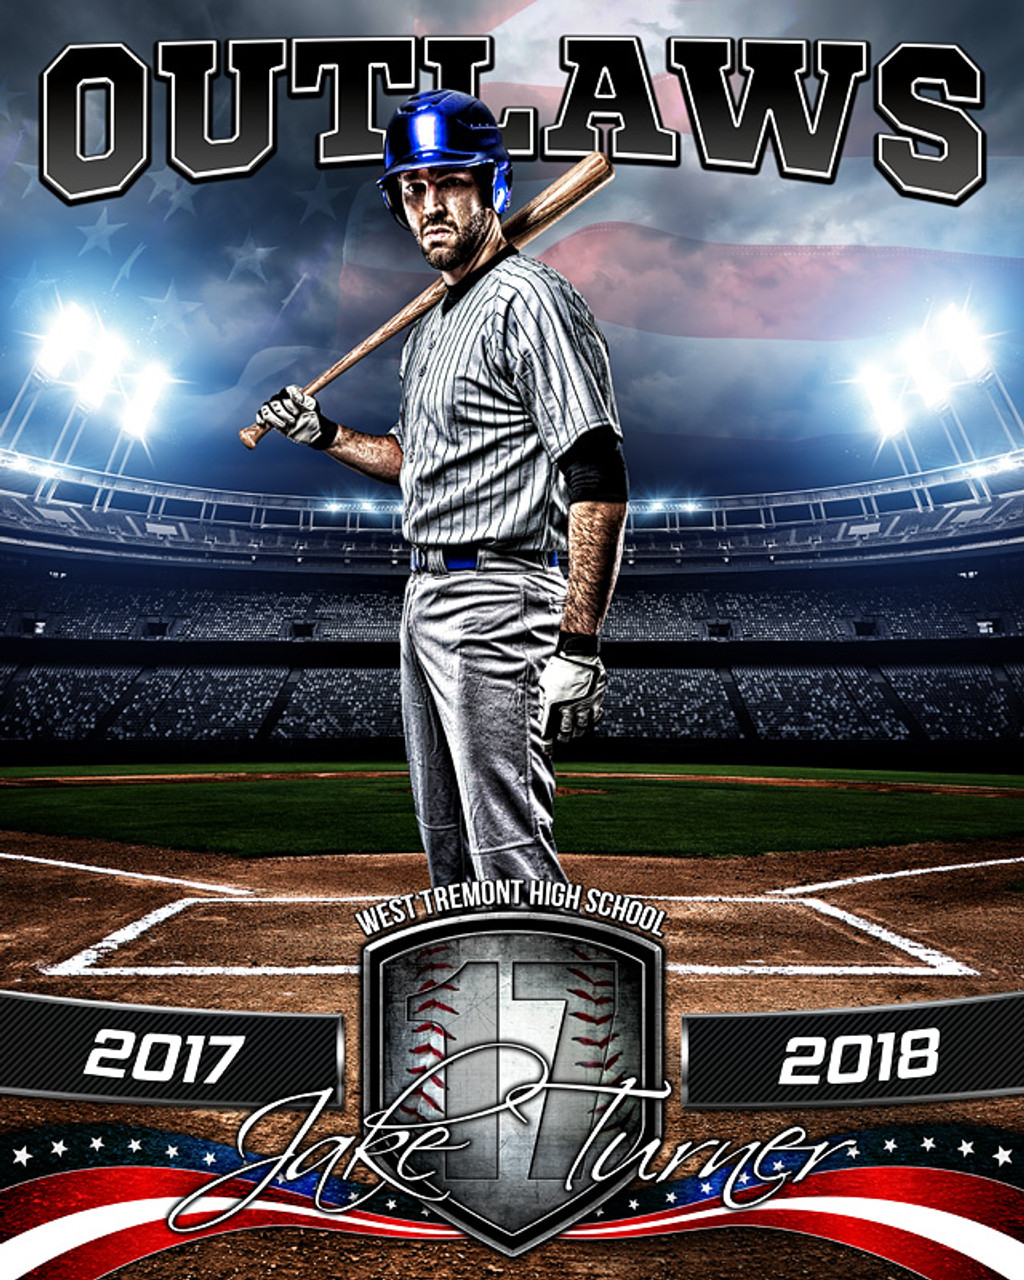 SPORTS POSTER PHOTO TEMPLATE - AMERICAN BASEBALL - PHOTOSHOP SPORTS TEMPLATE